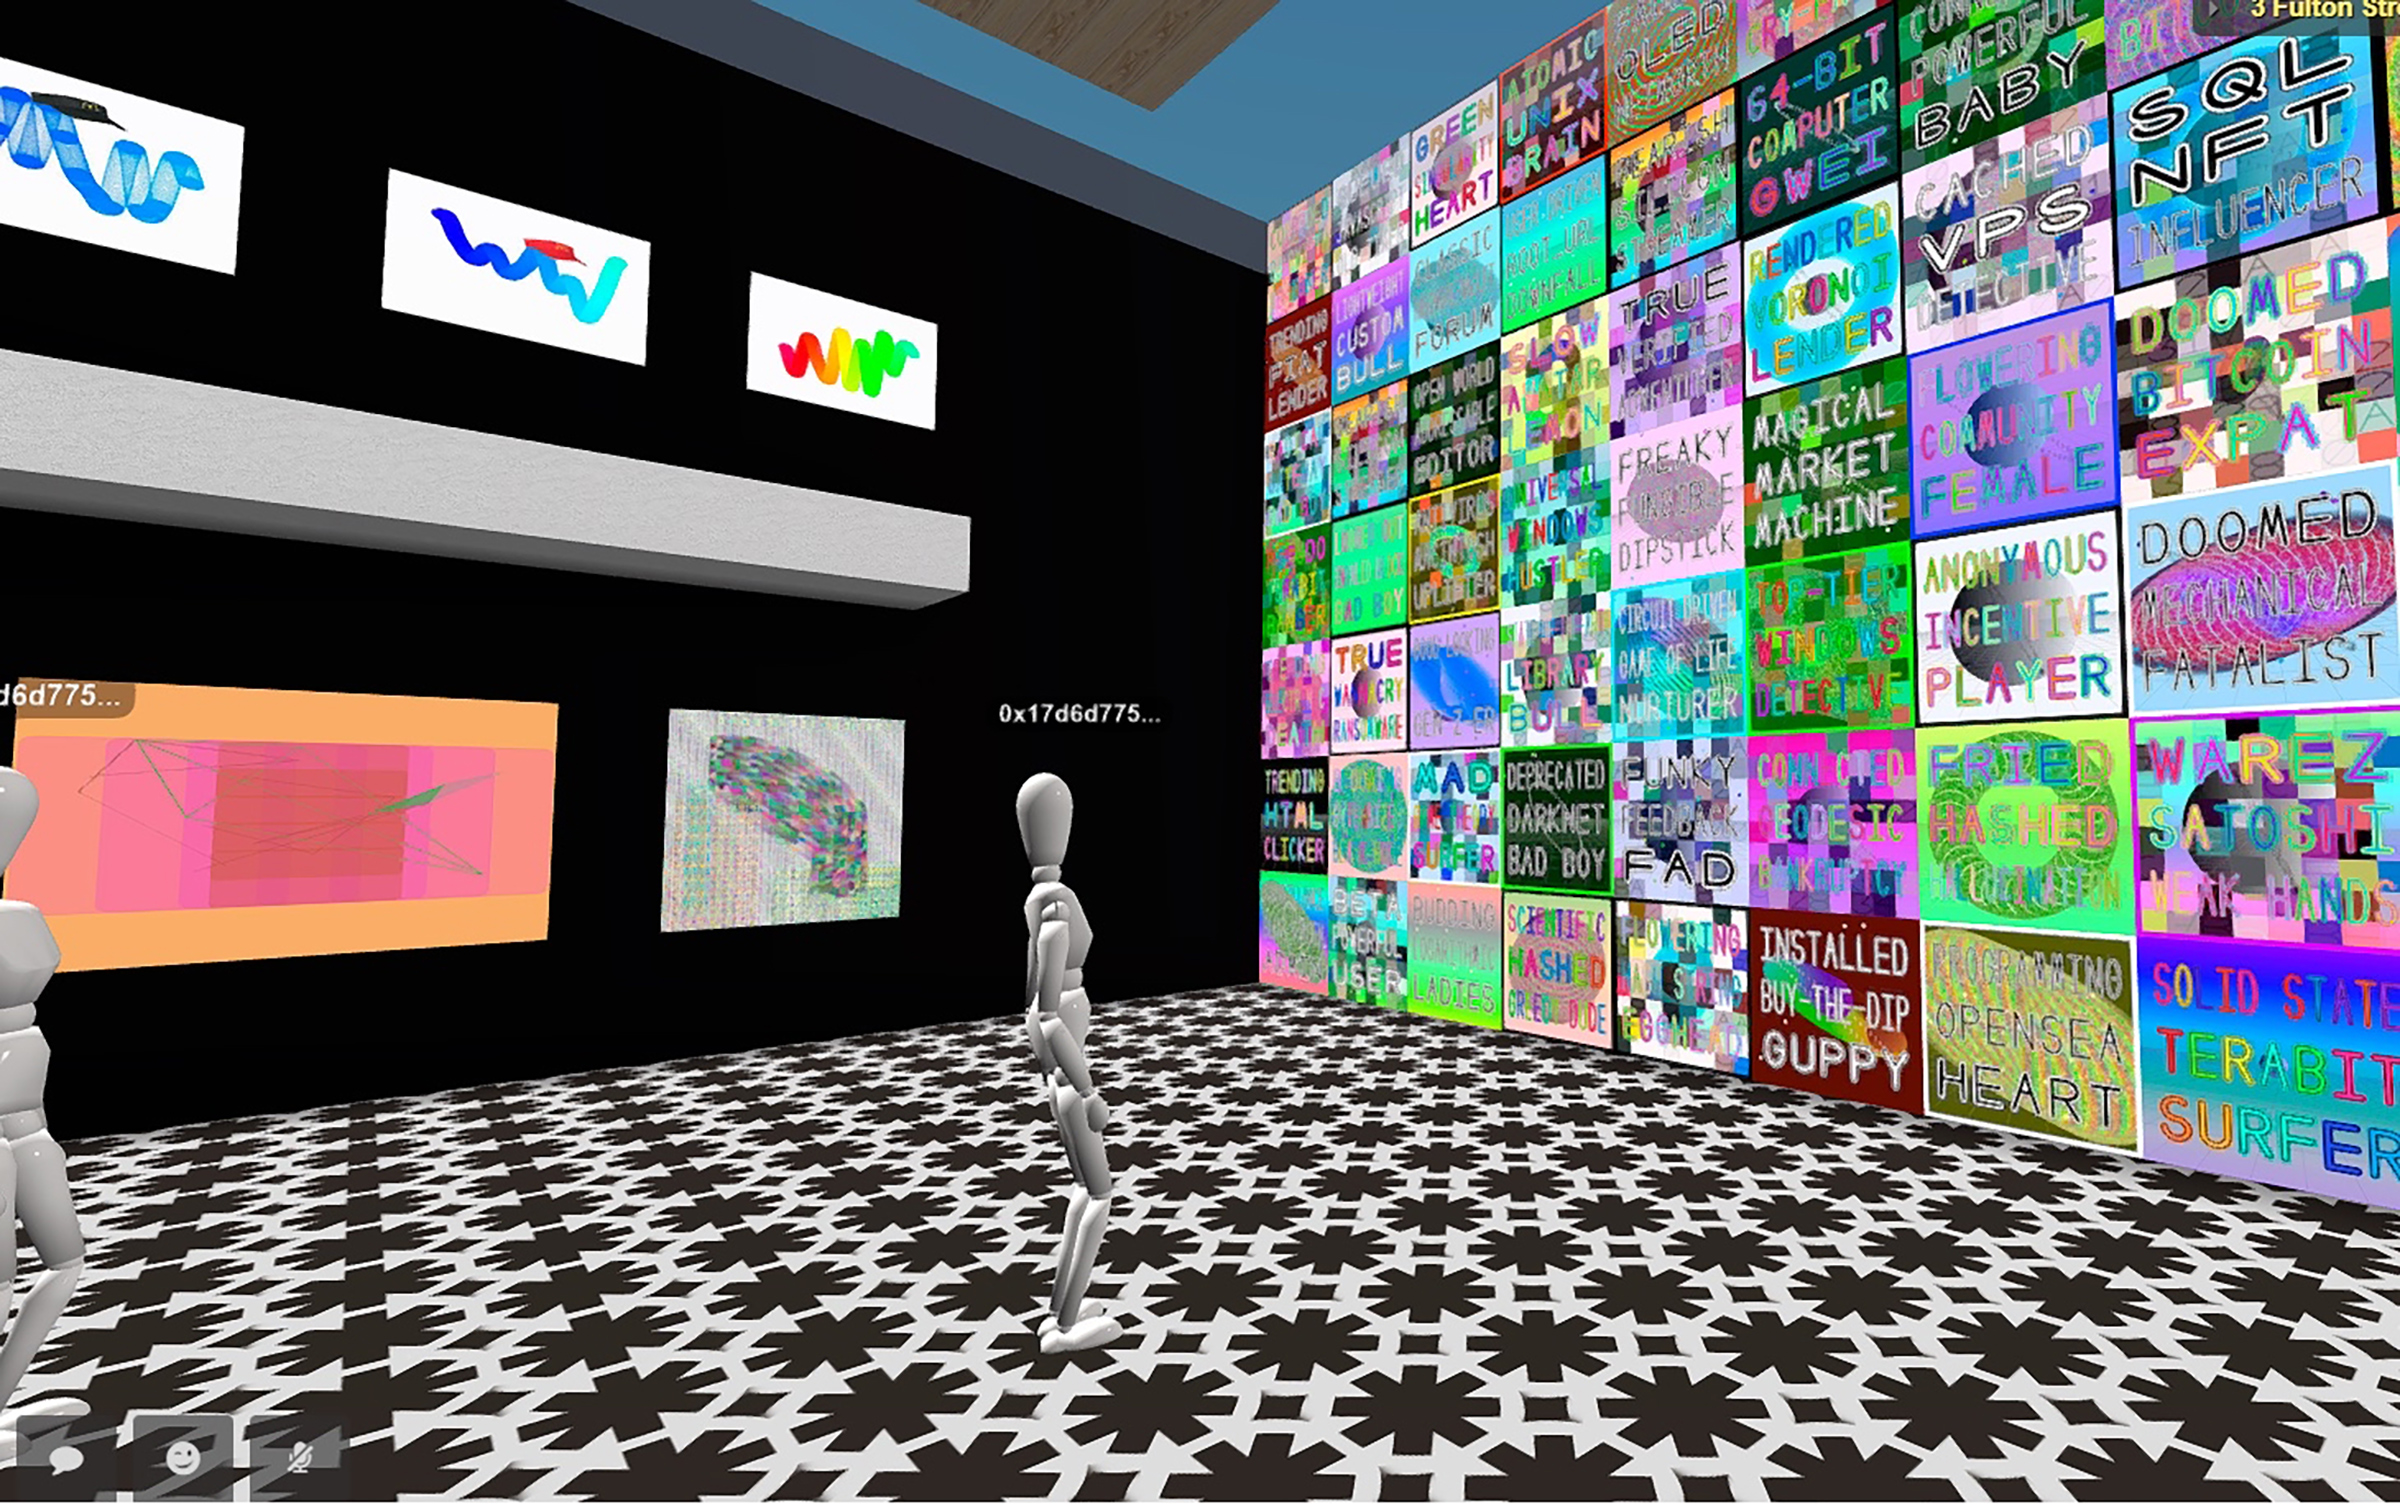 A screenshot of the collector Meredith Schipper’s virtual gallery